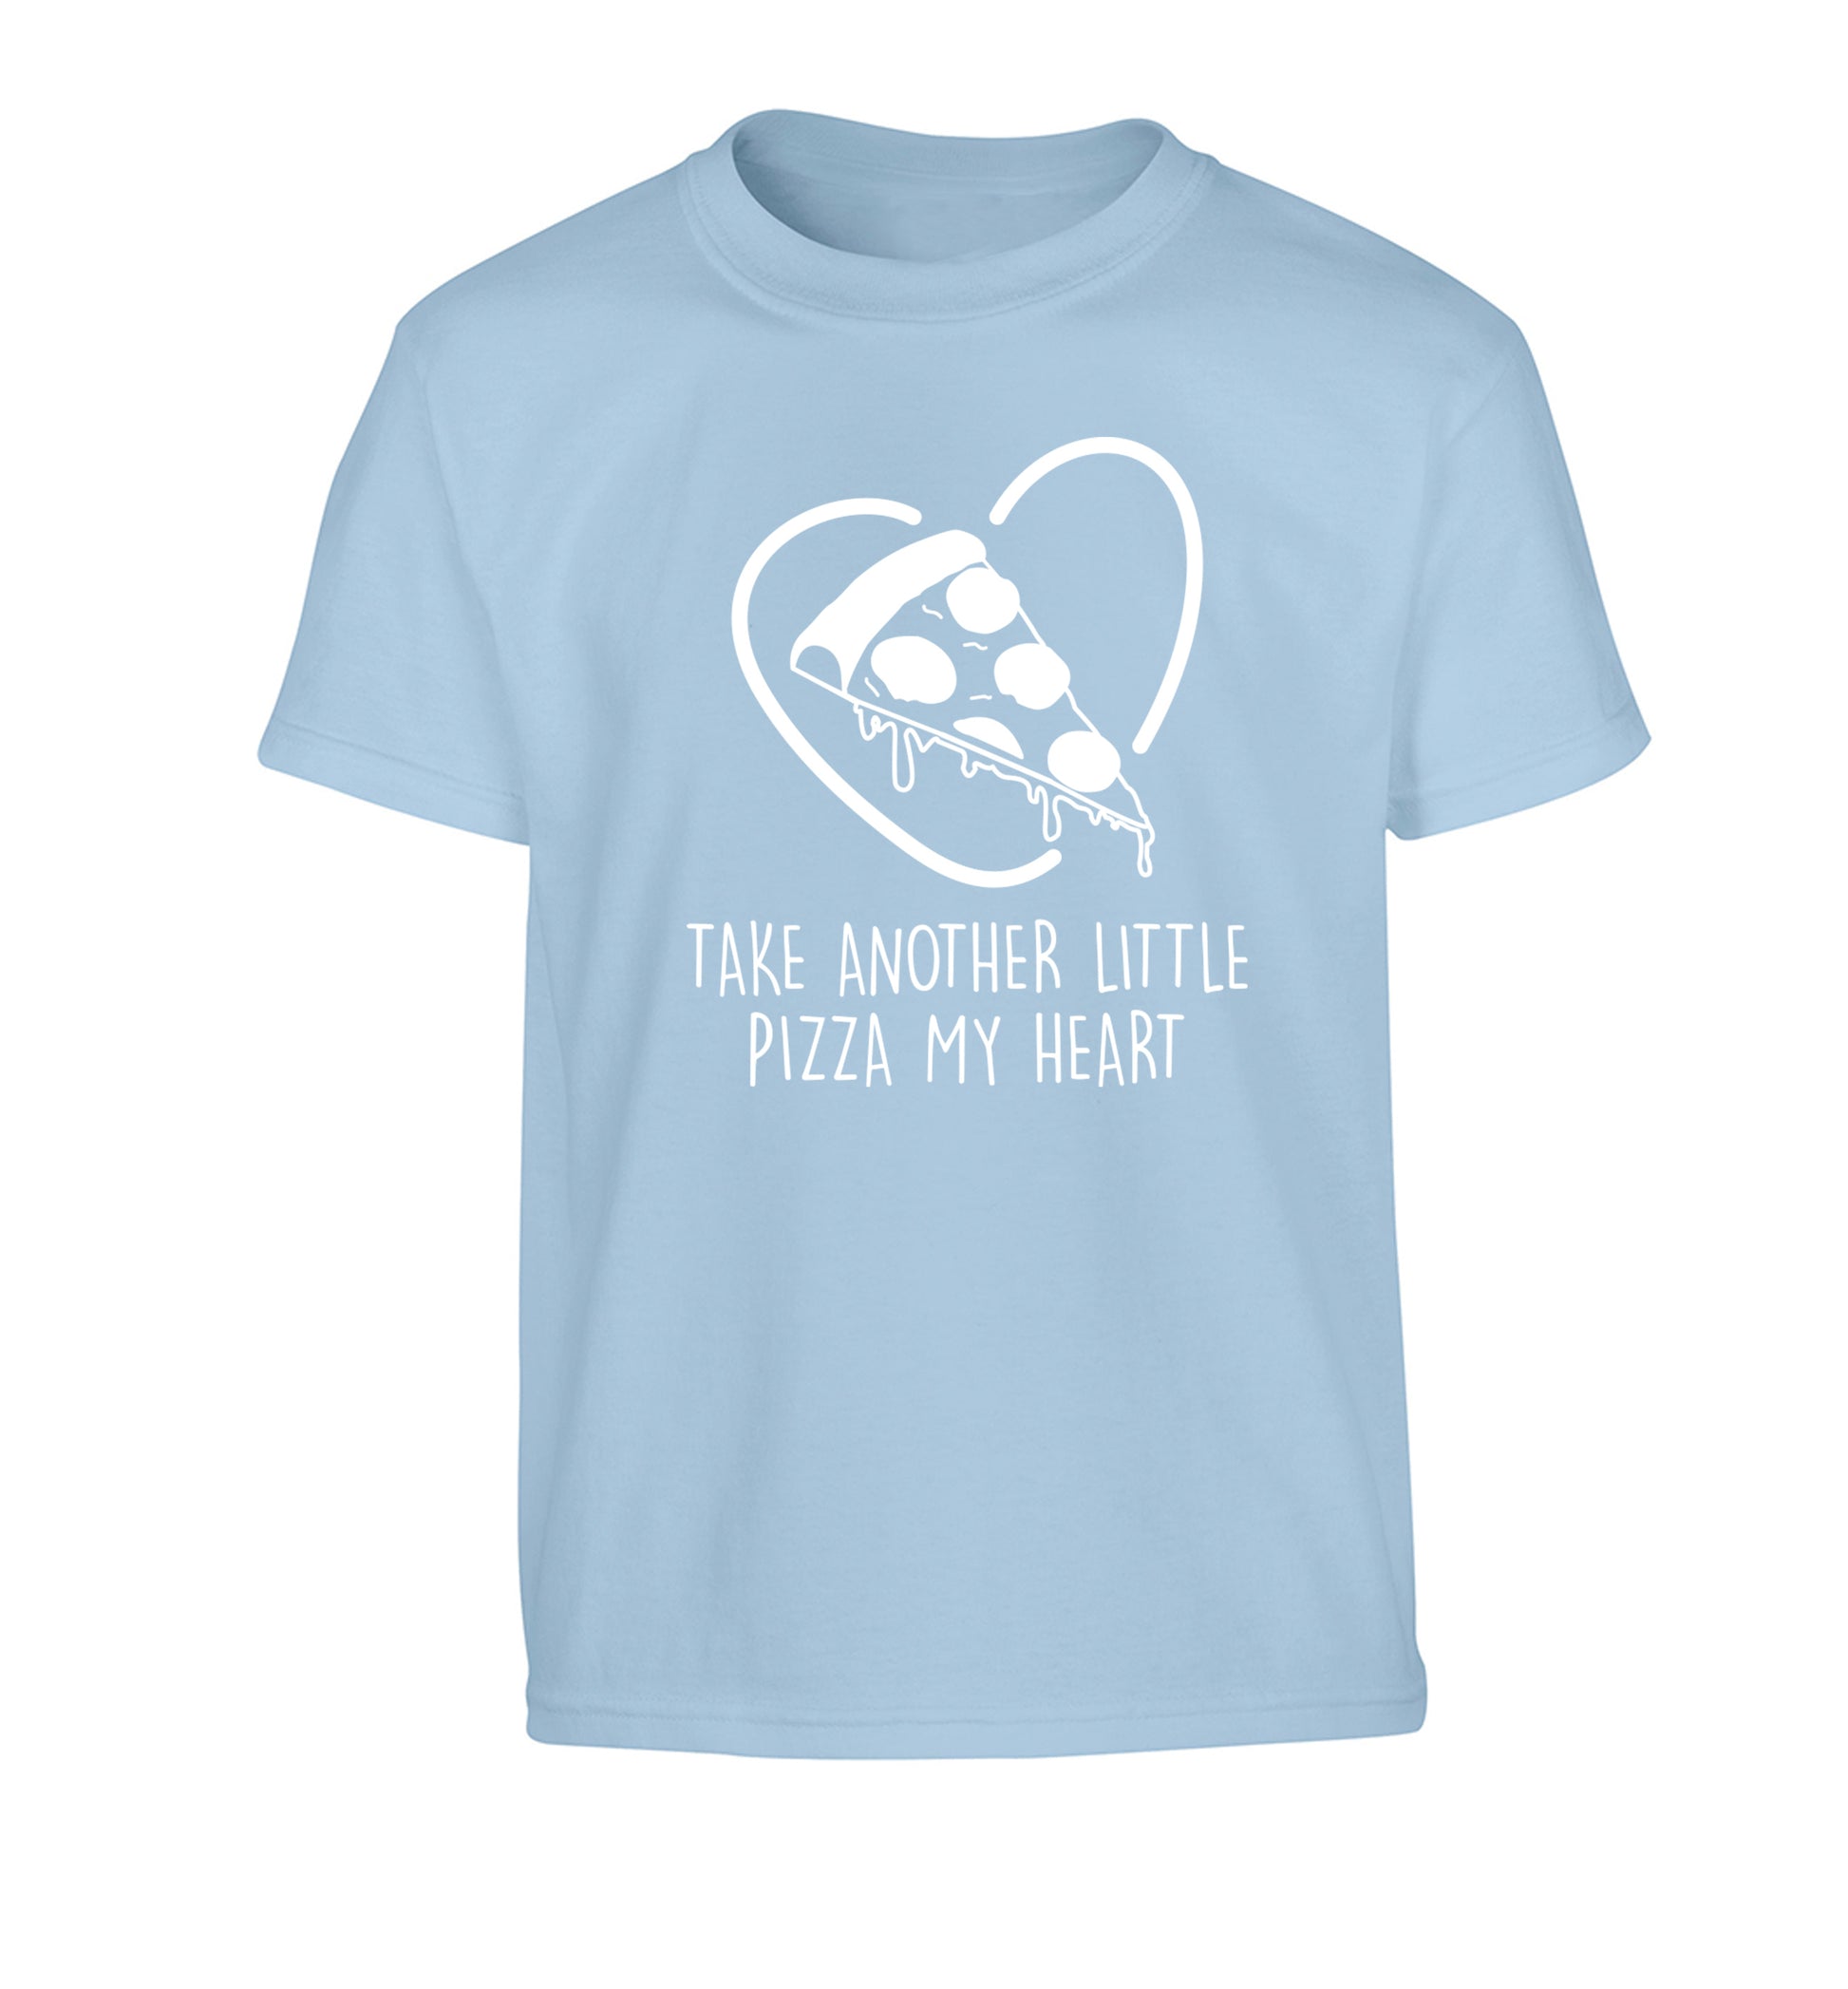 Take another little pizza my heart Children's light blue Tshirt 12-13 Years